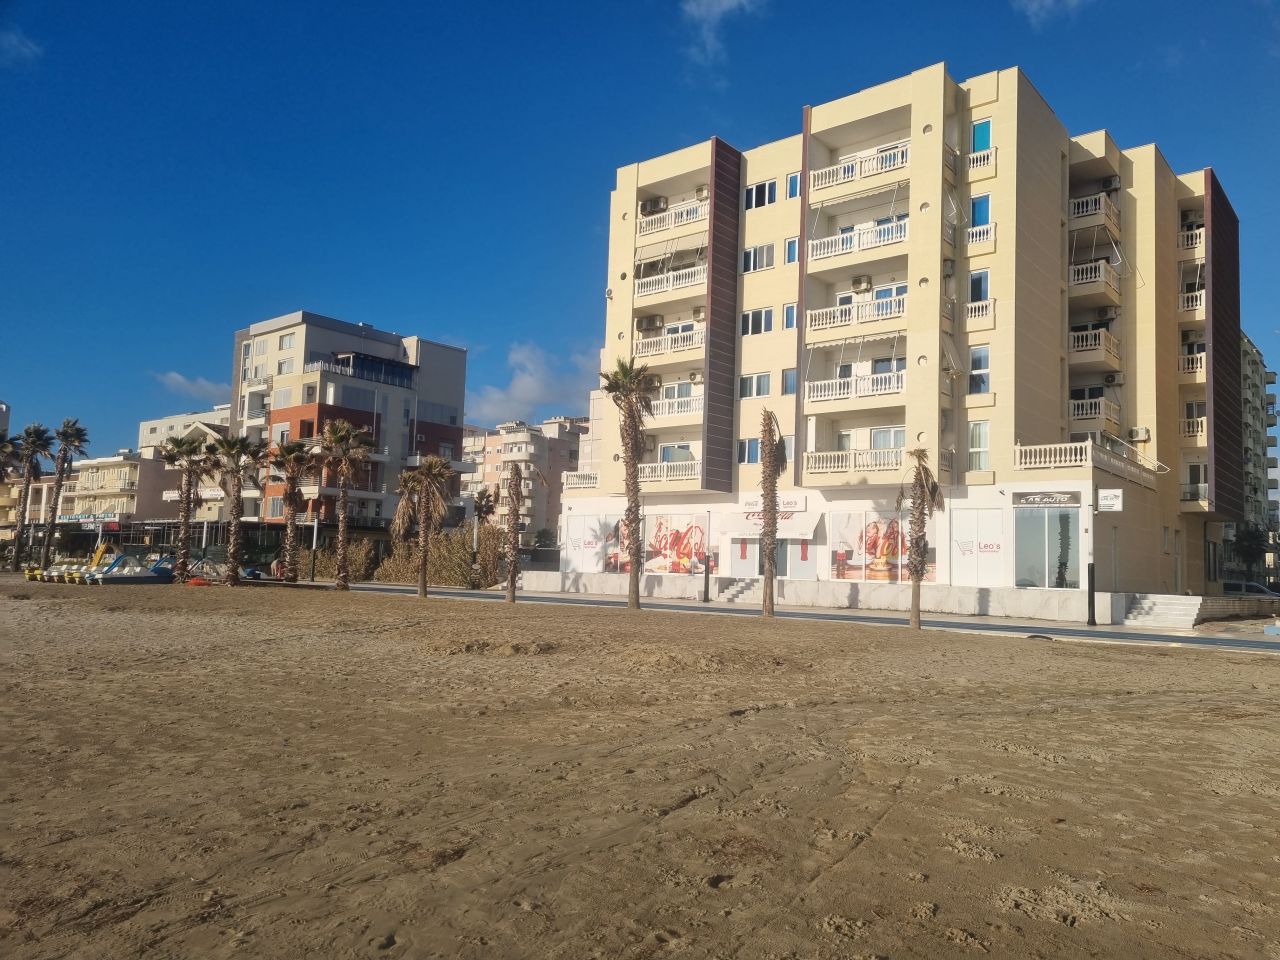 Studios For Sale In Durres Albania Sea View Suites Located In The Front Line